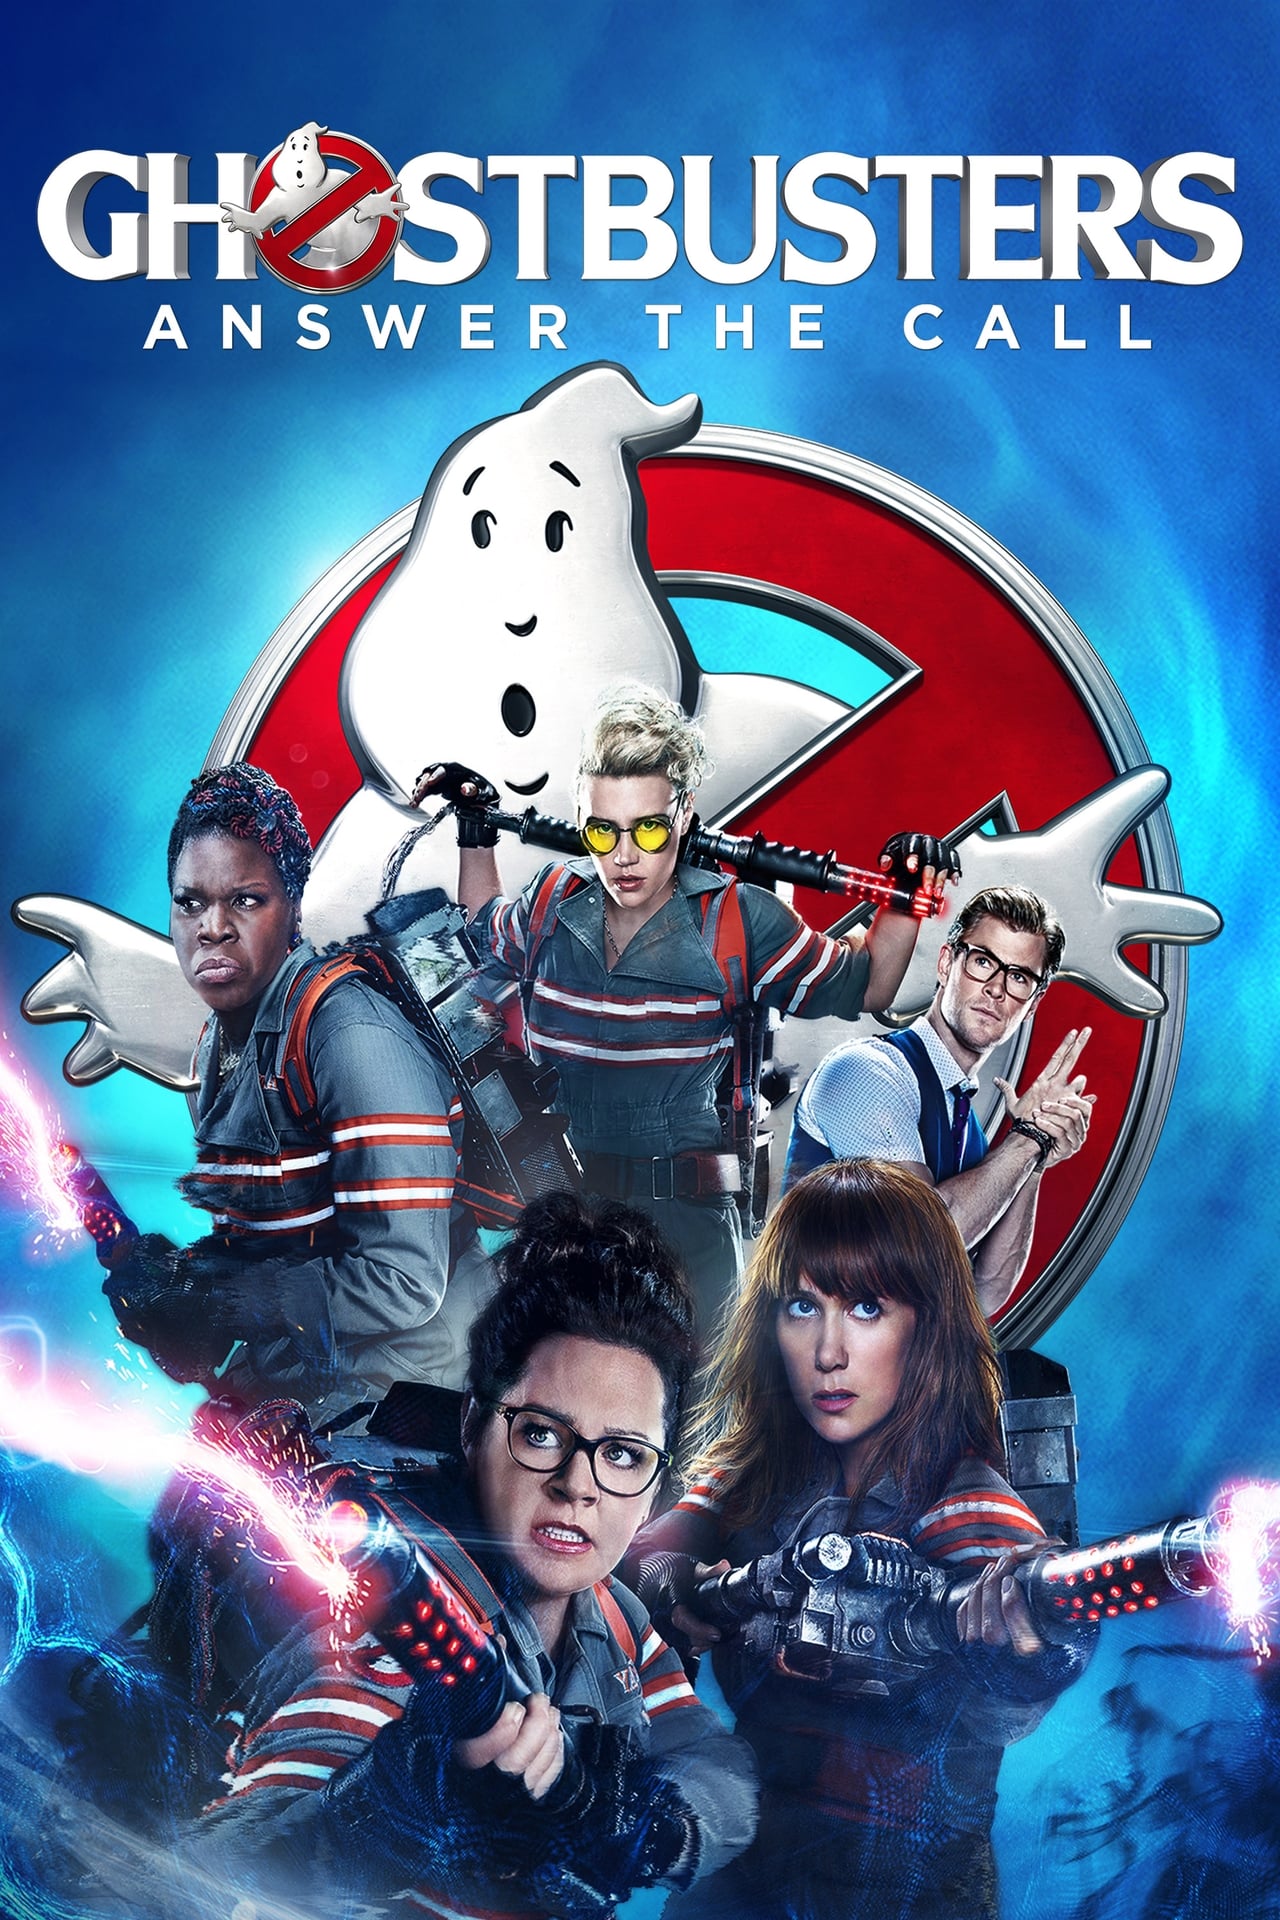 where can i watch ghostbusters